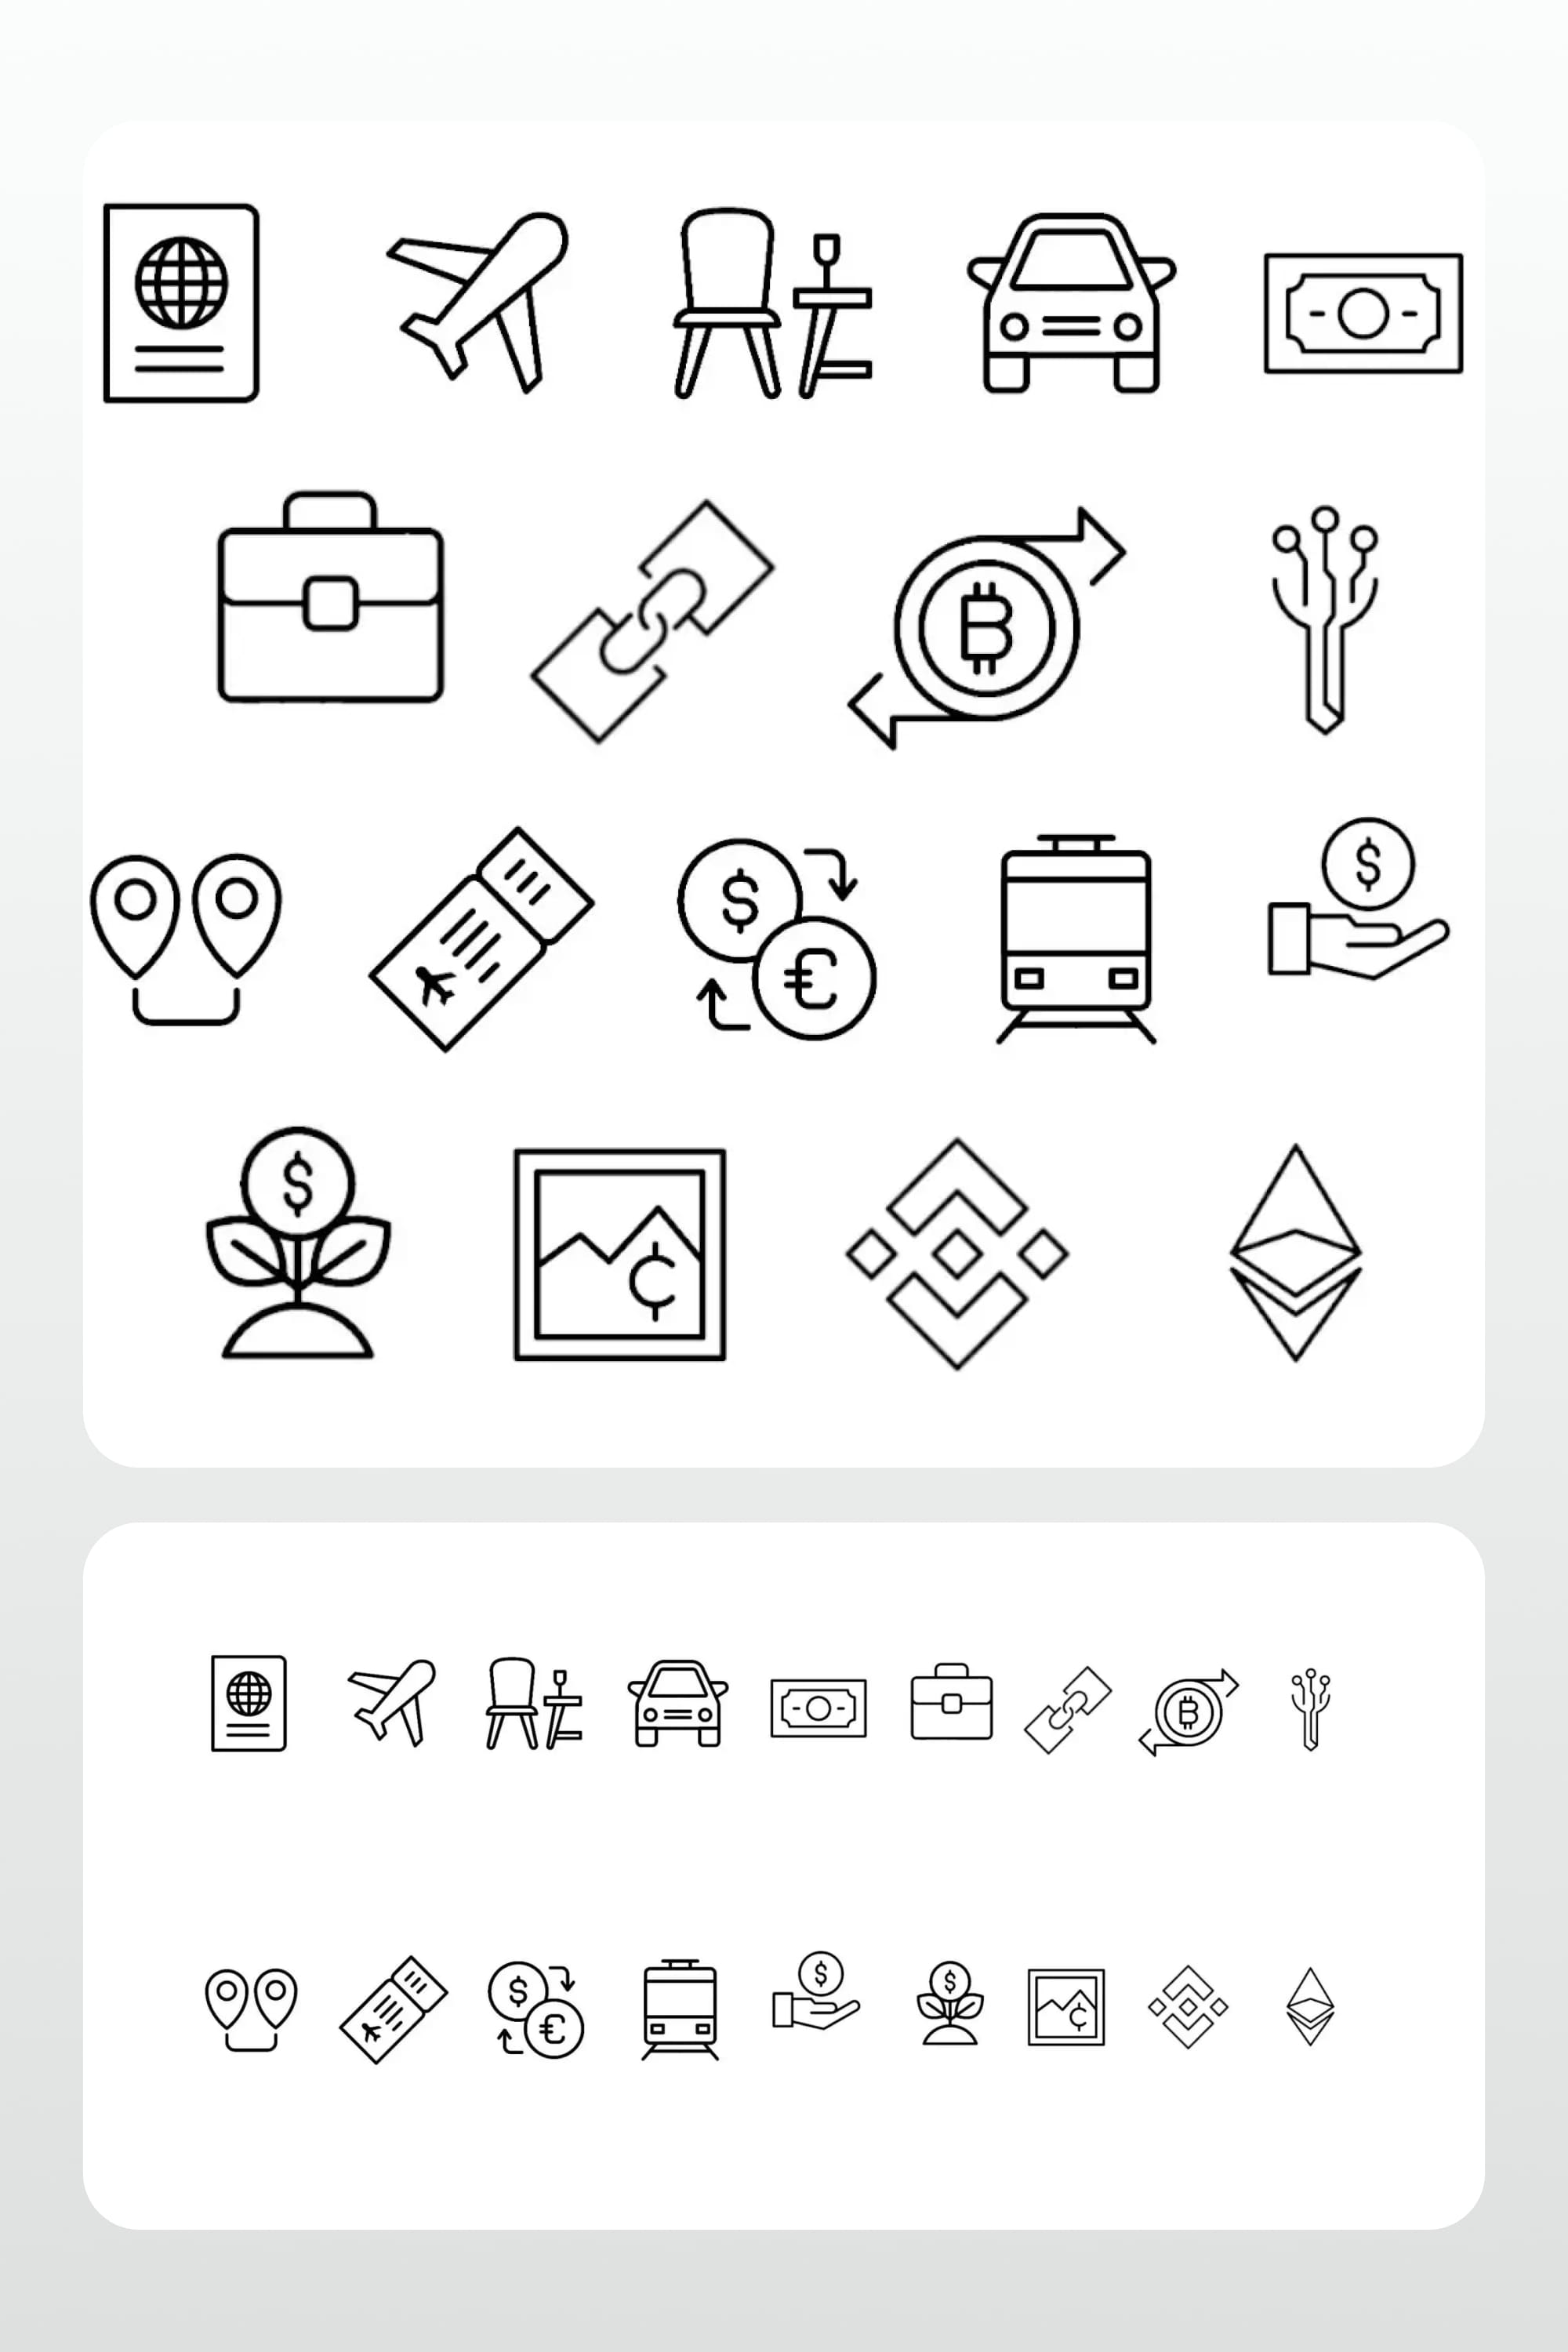 Black and white icons for crypto applications on a white background.